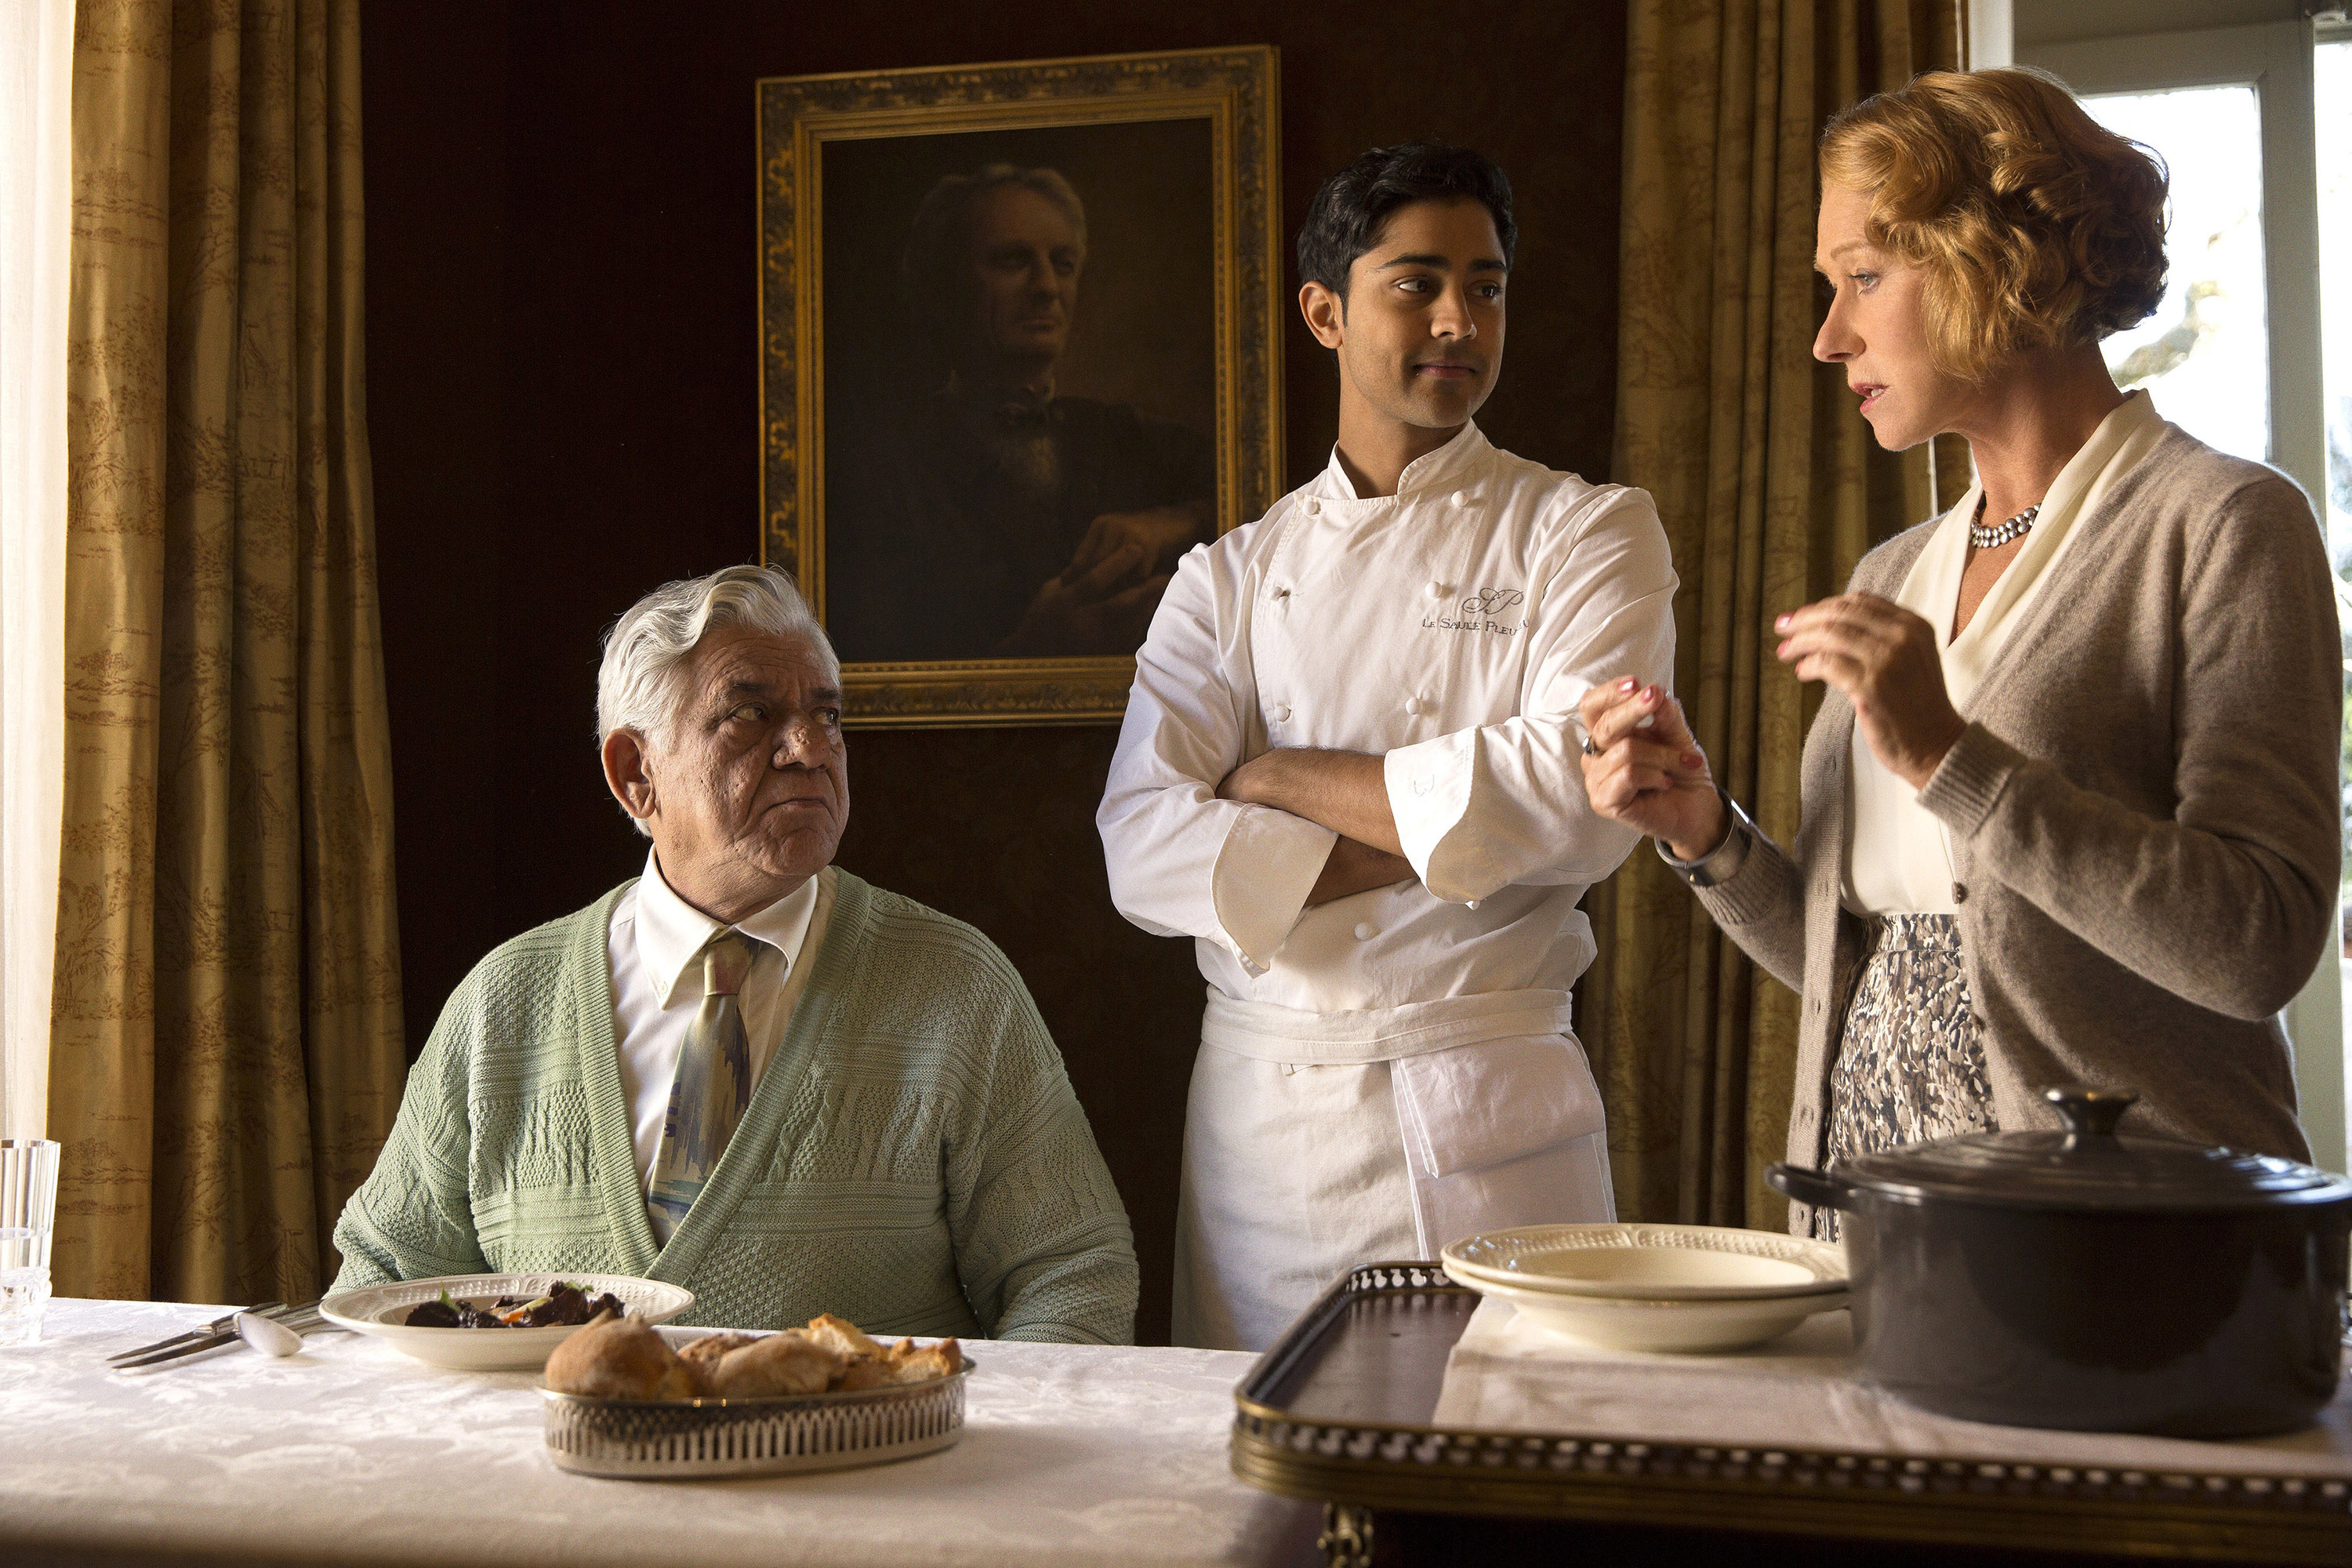 Helen Mirren and Manish Dayal talk to Om Puri at a table